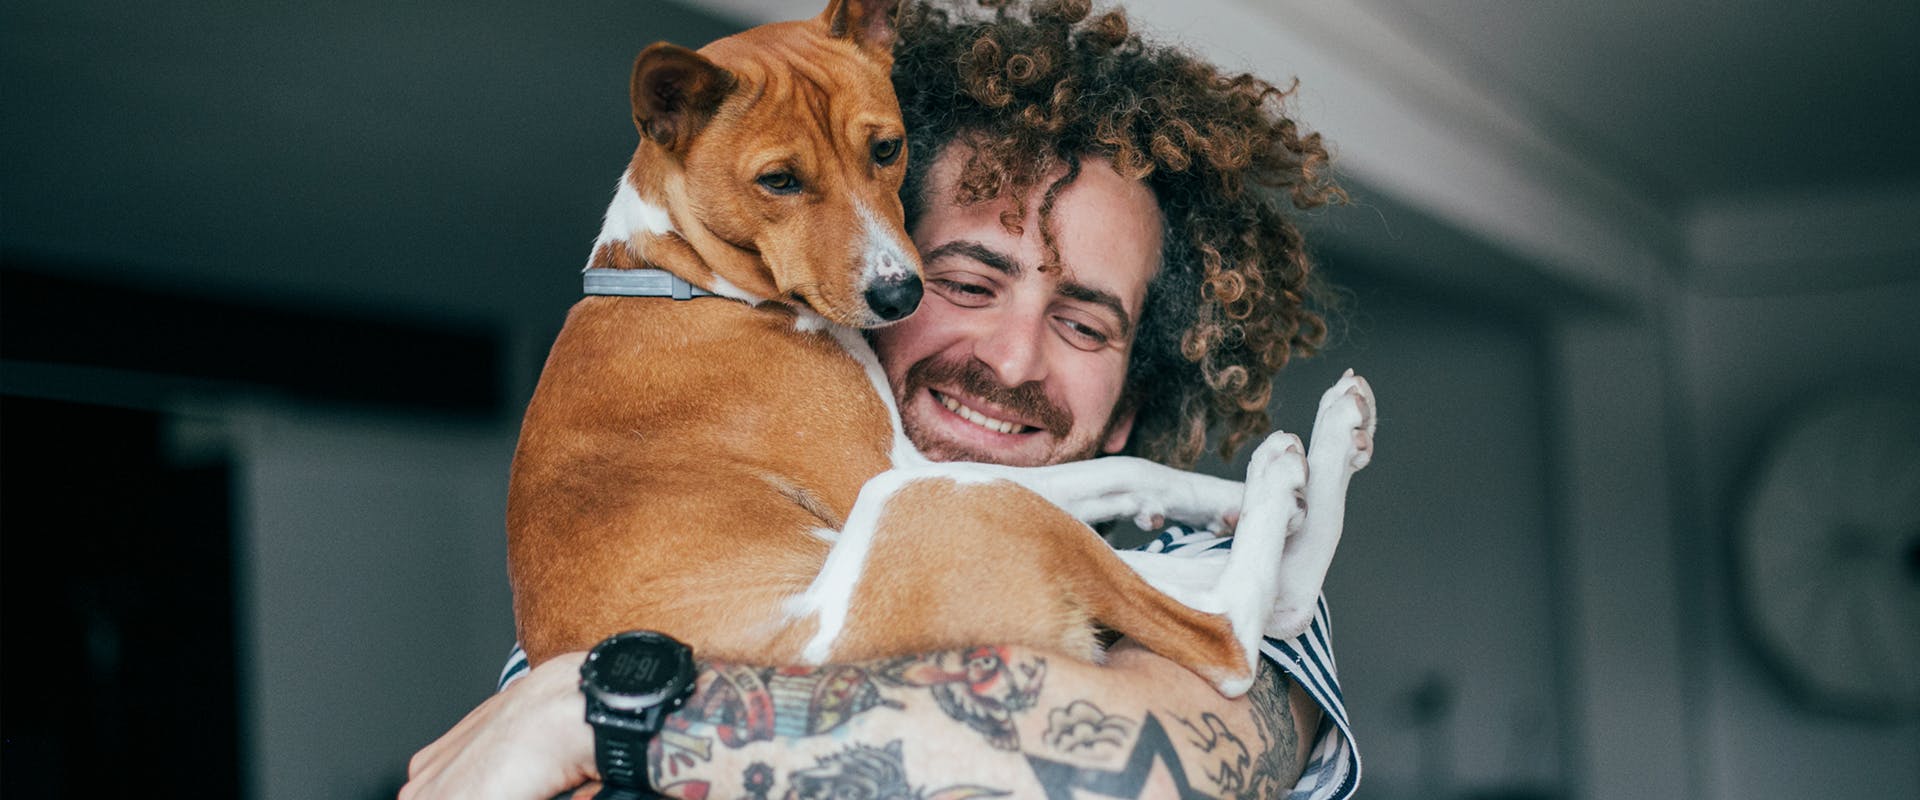 A smiling man holding a dog in his arms